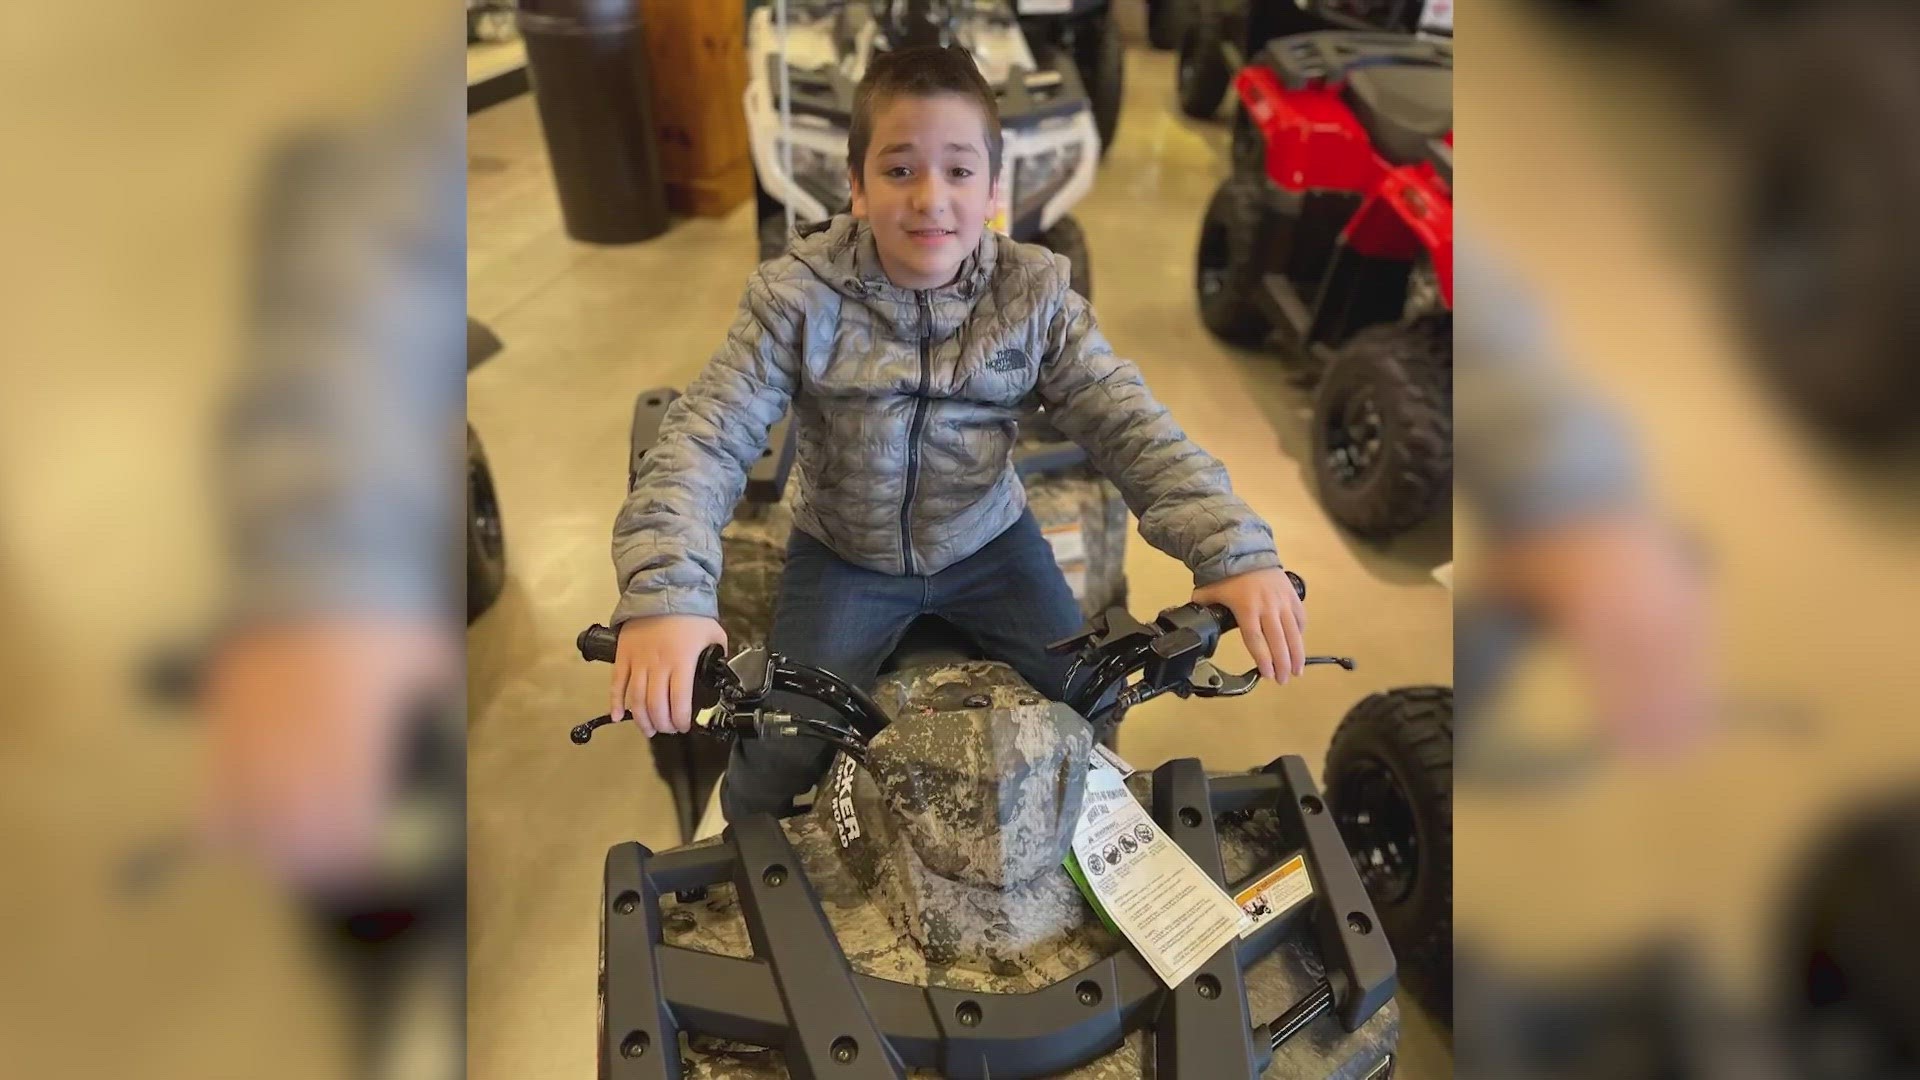 12-year-old Joseph Torres was last seen Sunday afternoon, and told a transit officer he was taking a bus to Crossroads near Fredericksburg.